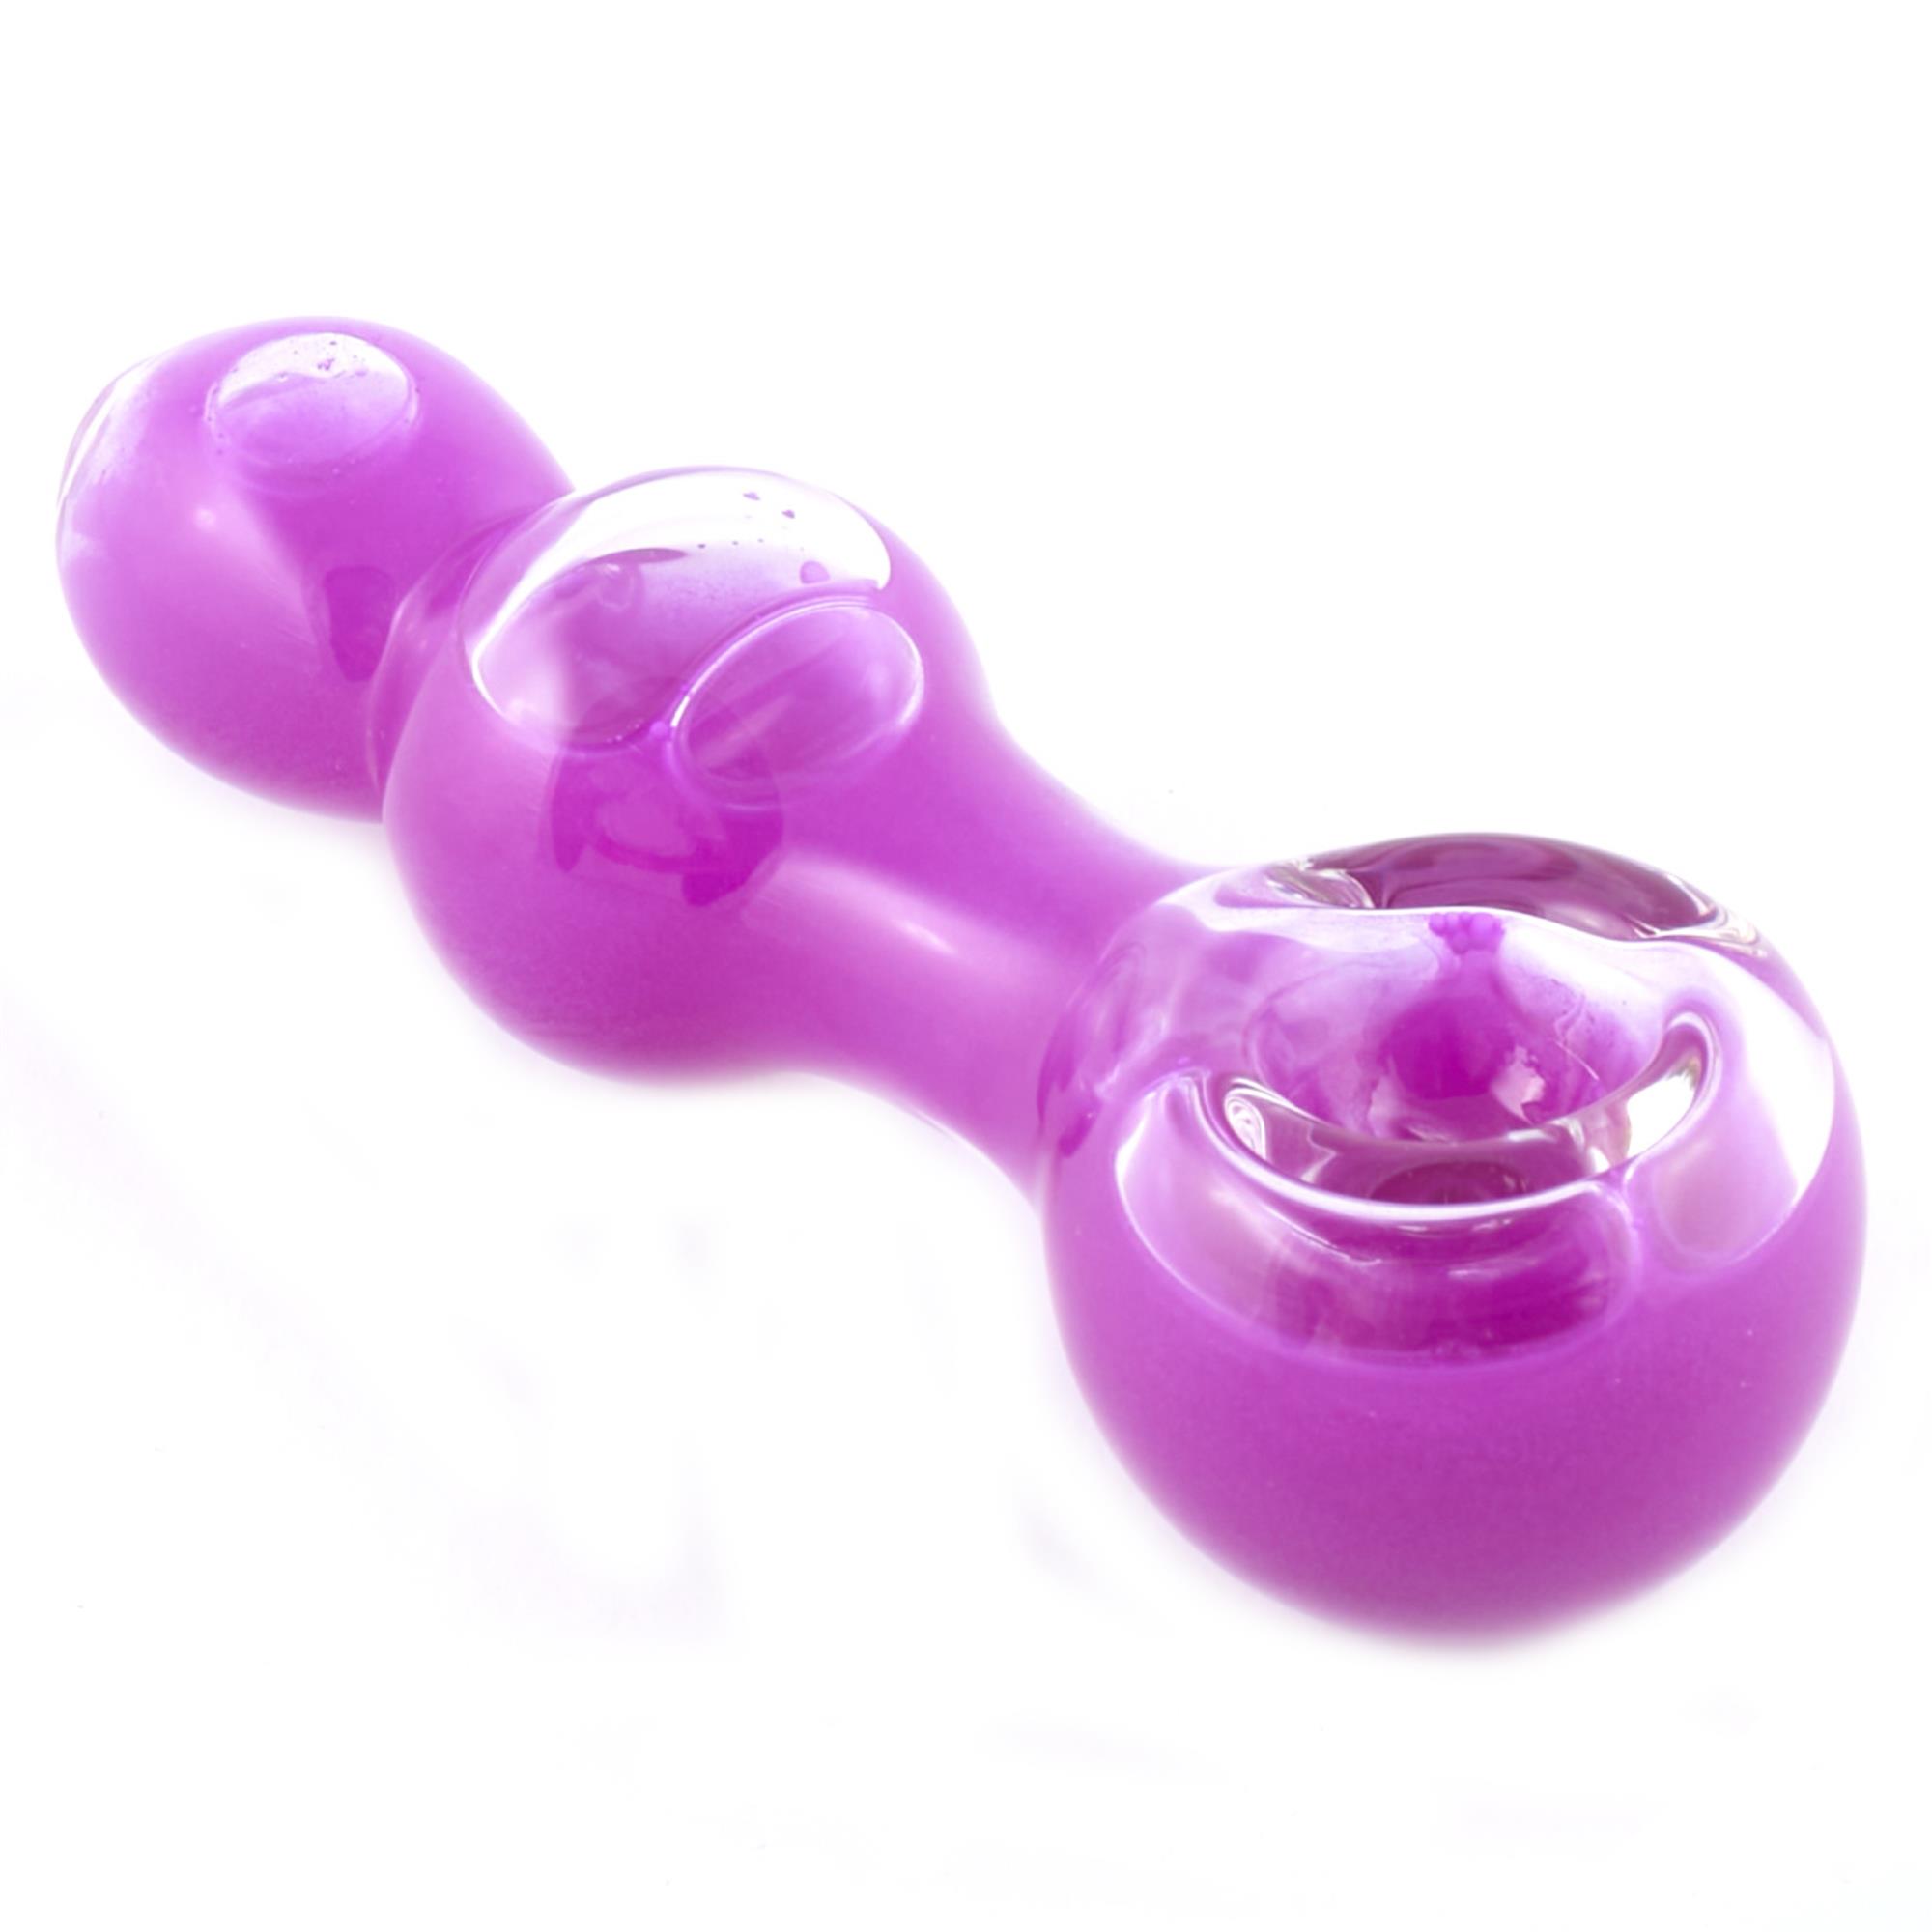 CROOKED SPOON PIPE